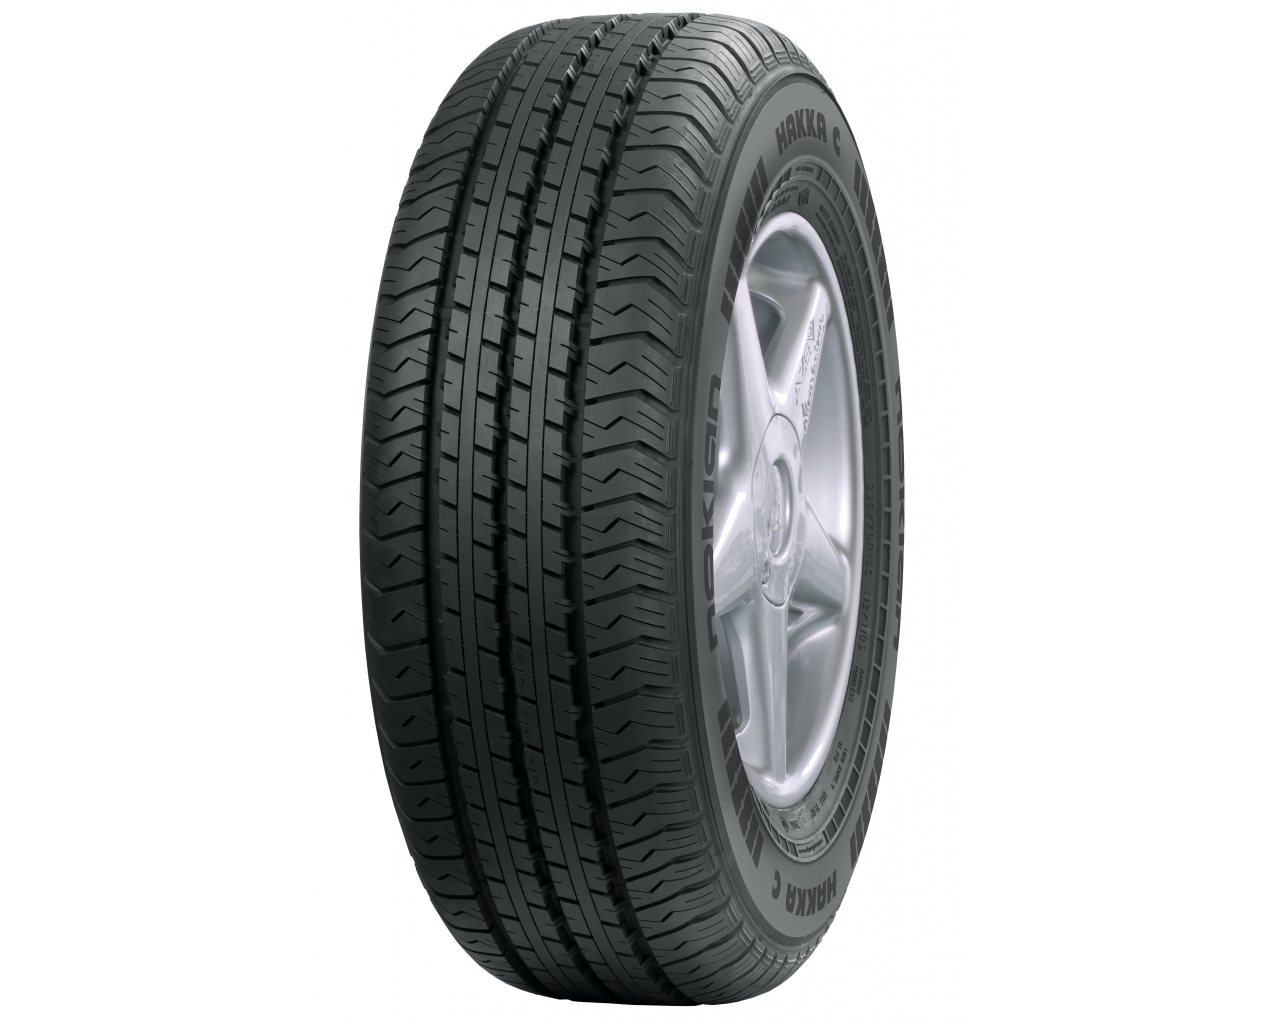 Nokian C Cargo | What Tyre | Independent tyre comparison